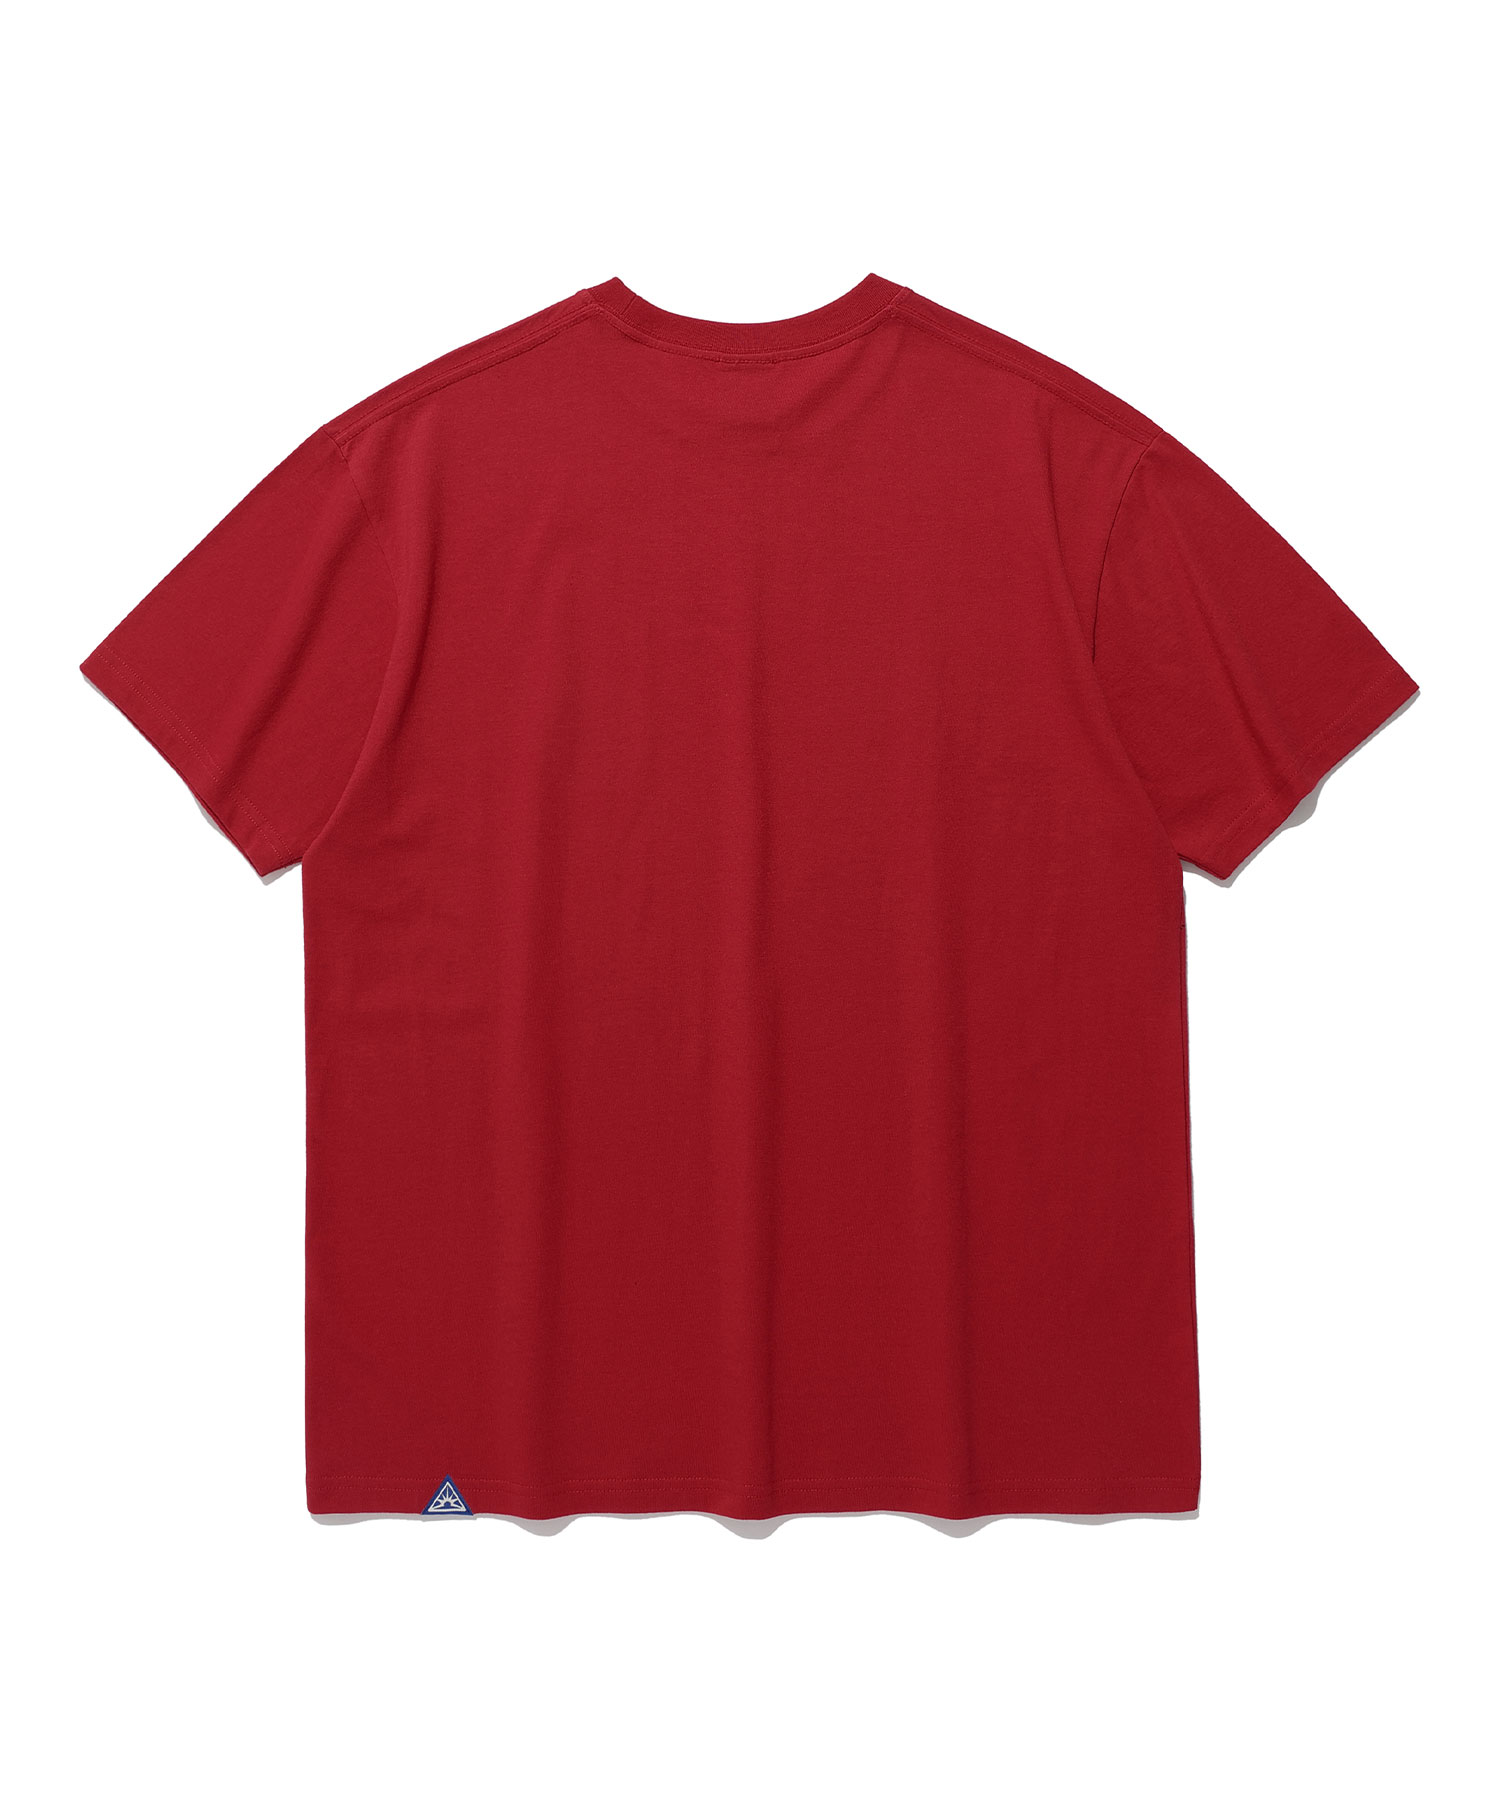 TITLE RABBIT TEE[RED]